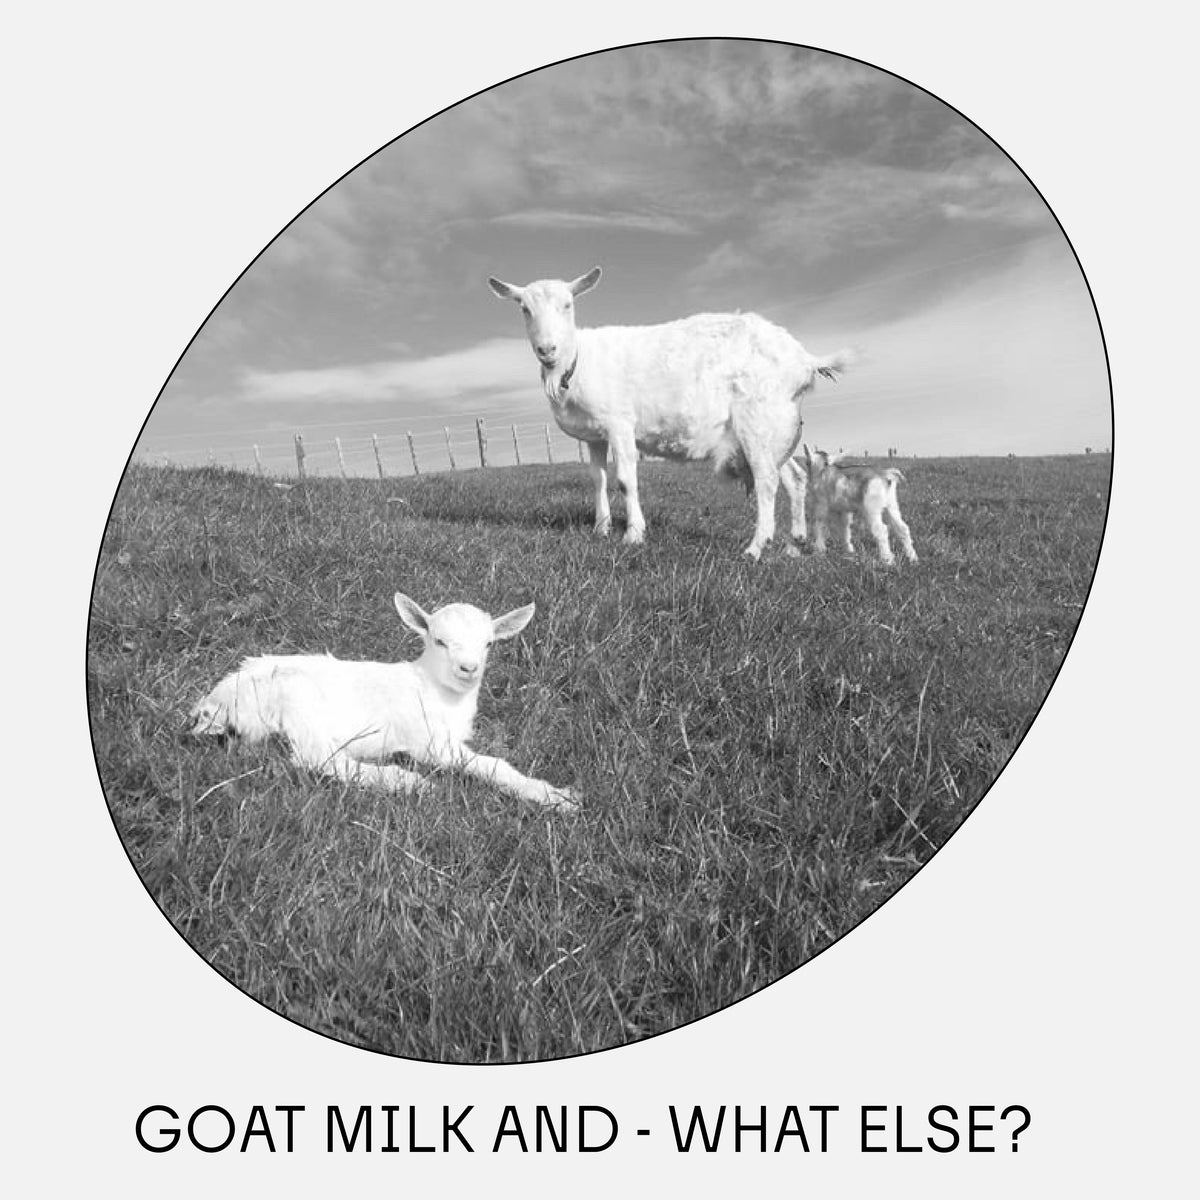 Goat Milk and - What else?